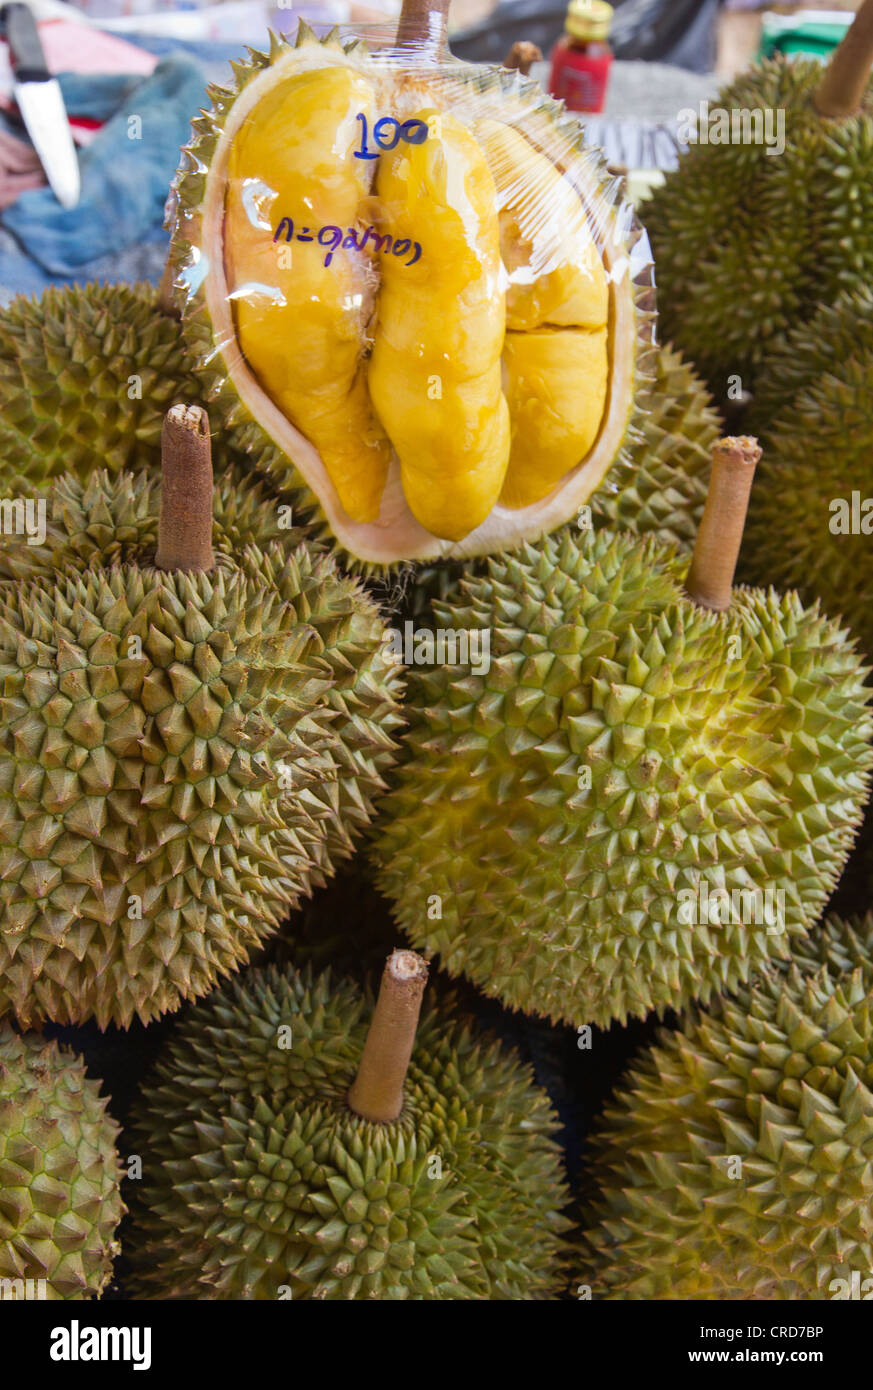 Durian for sale on a market stall with open fruit covered with plastic wrap Stock Photo